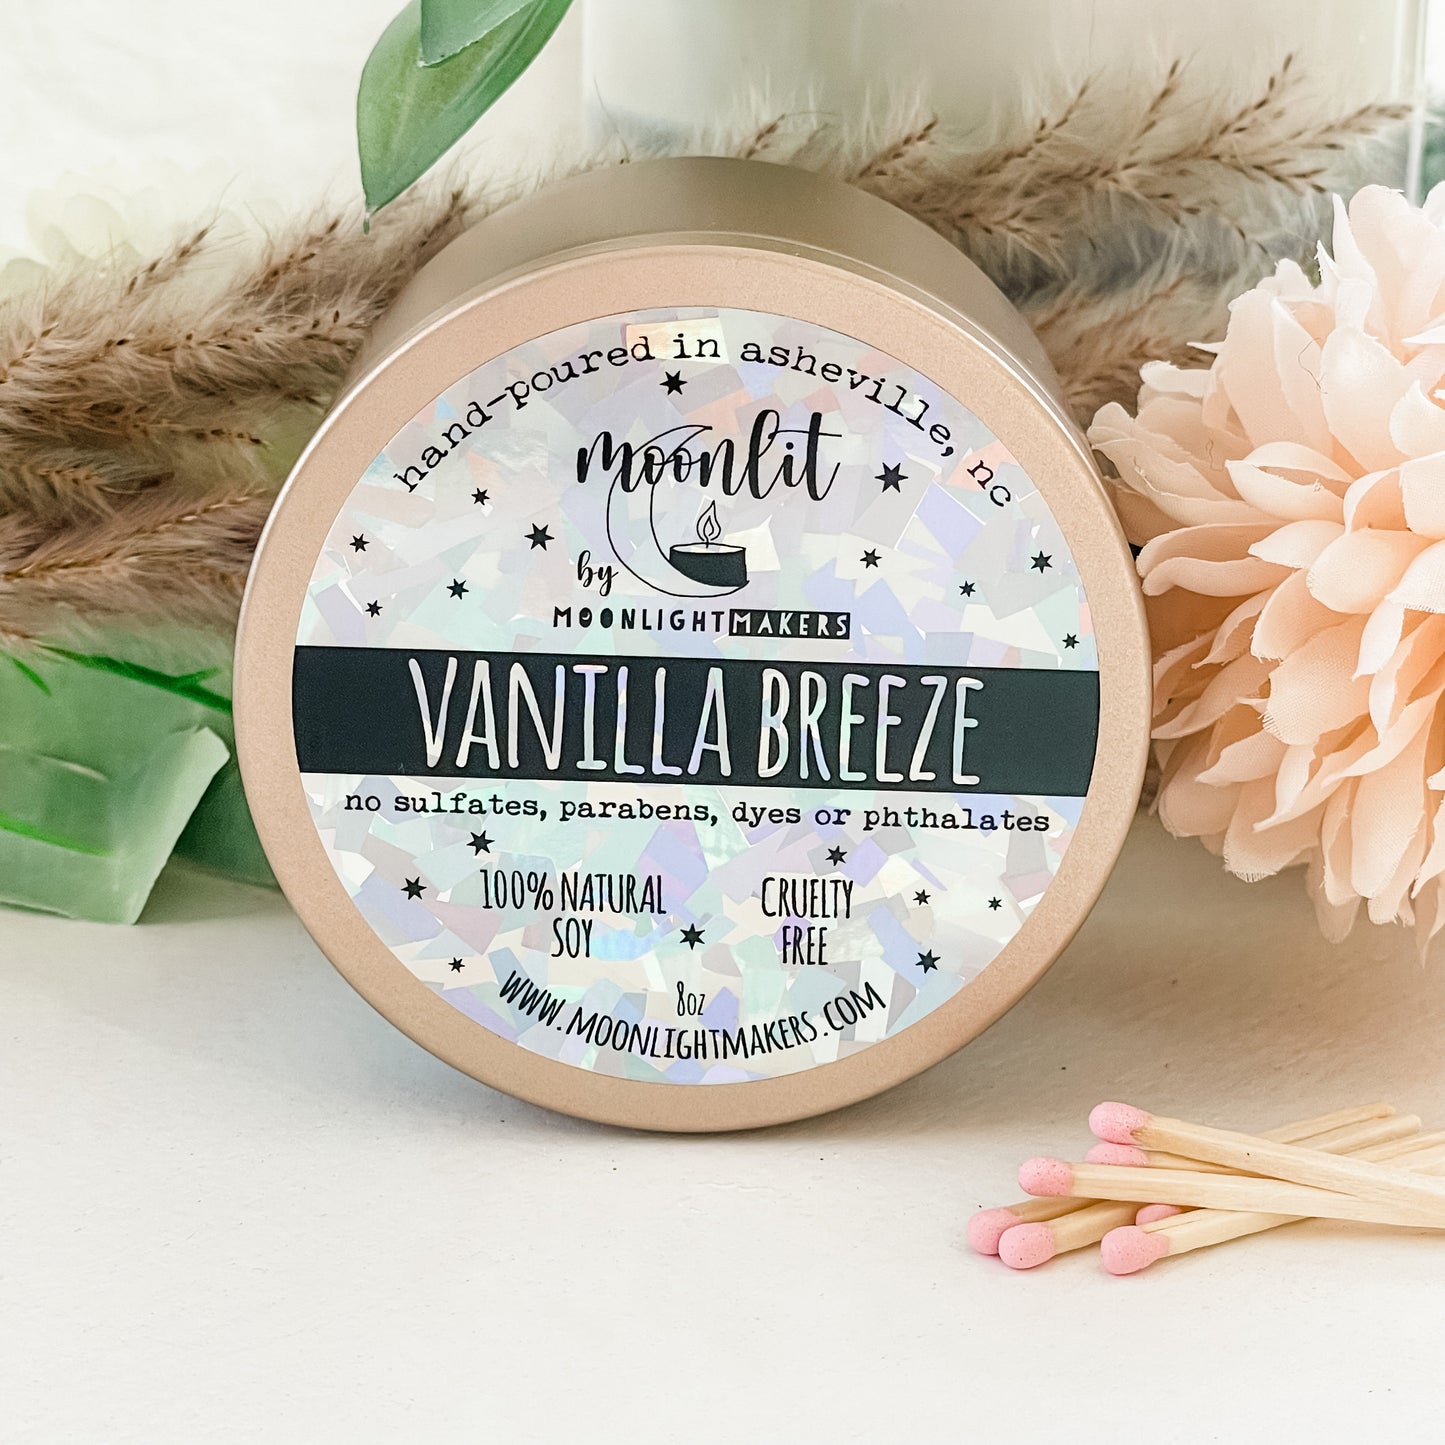 You're Not A Regular Mom, You Are A Cool Mom - 8oz Rose Gold Candle - Vanilla Breeze - 100% Natural Soy Wax